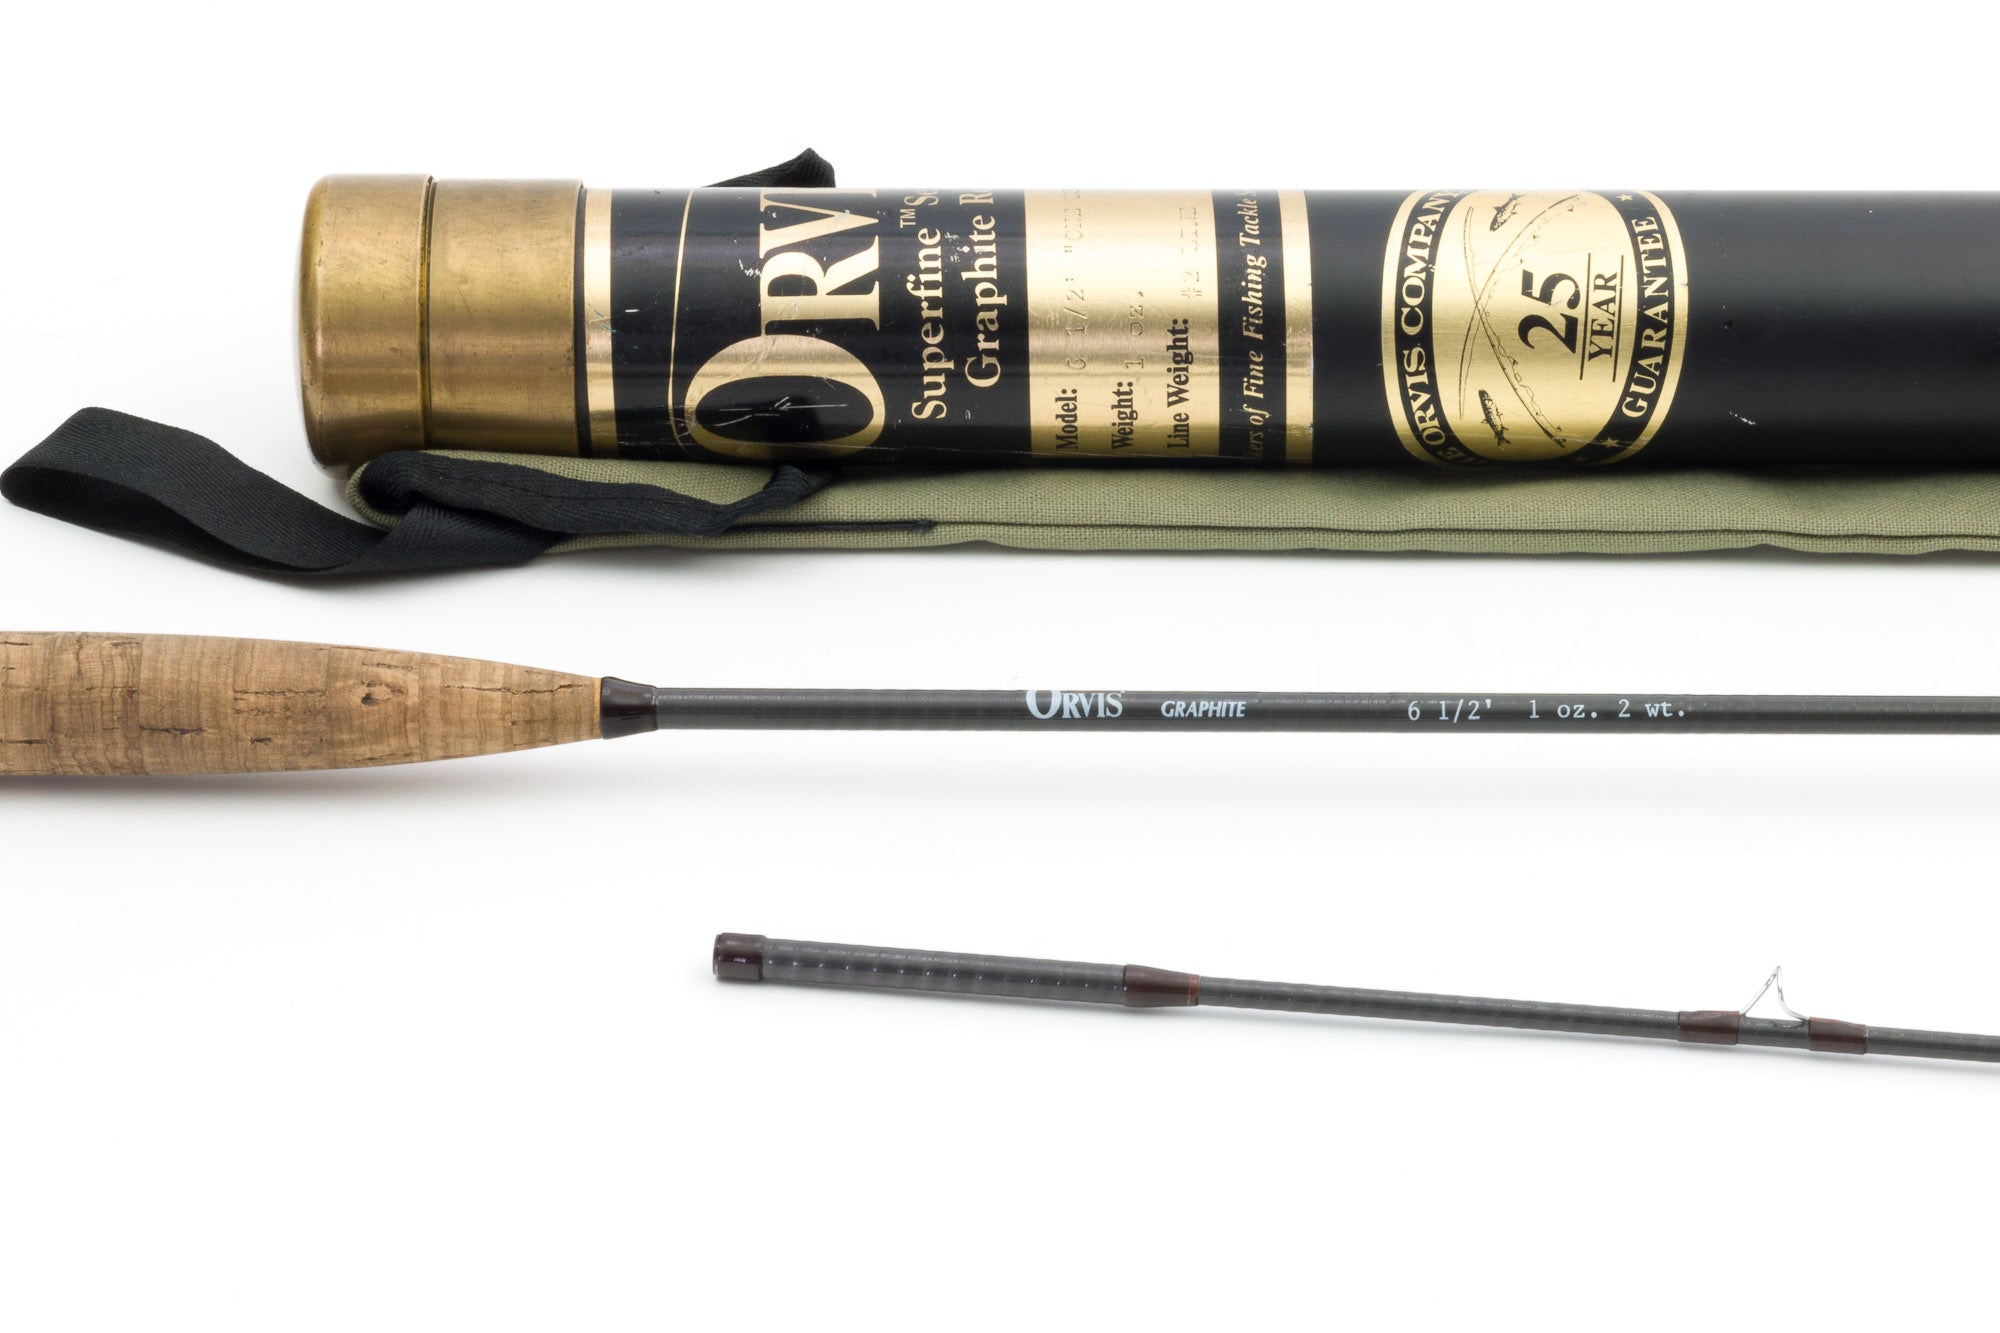 Orvis - Superfine One Ounce 6'6 2-piece 2wt Graphite Fly Rod